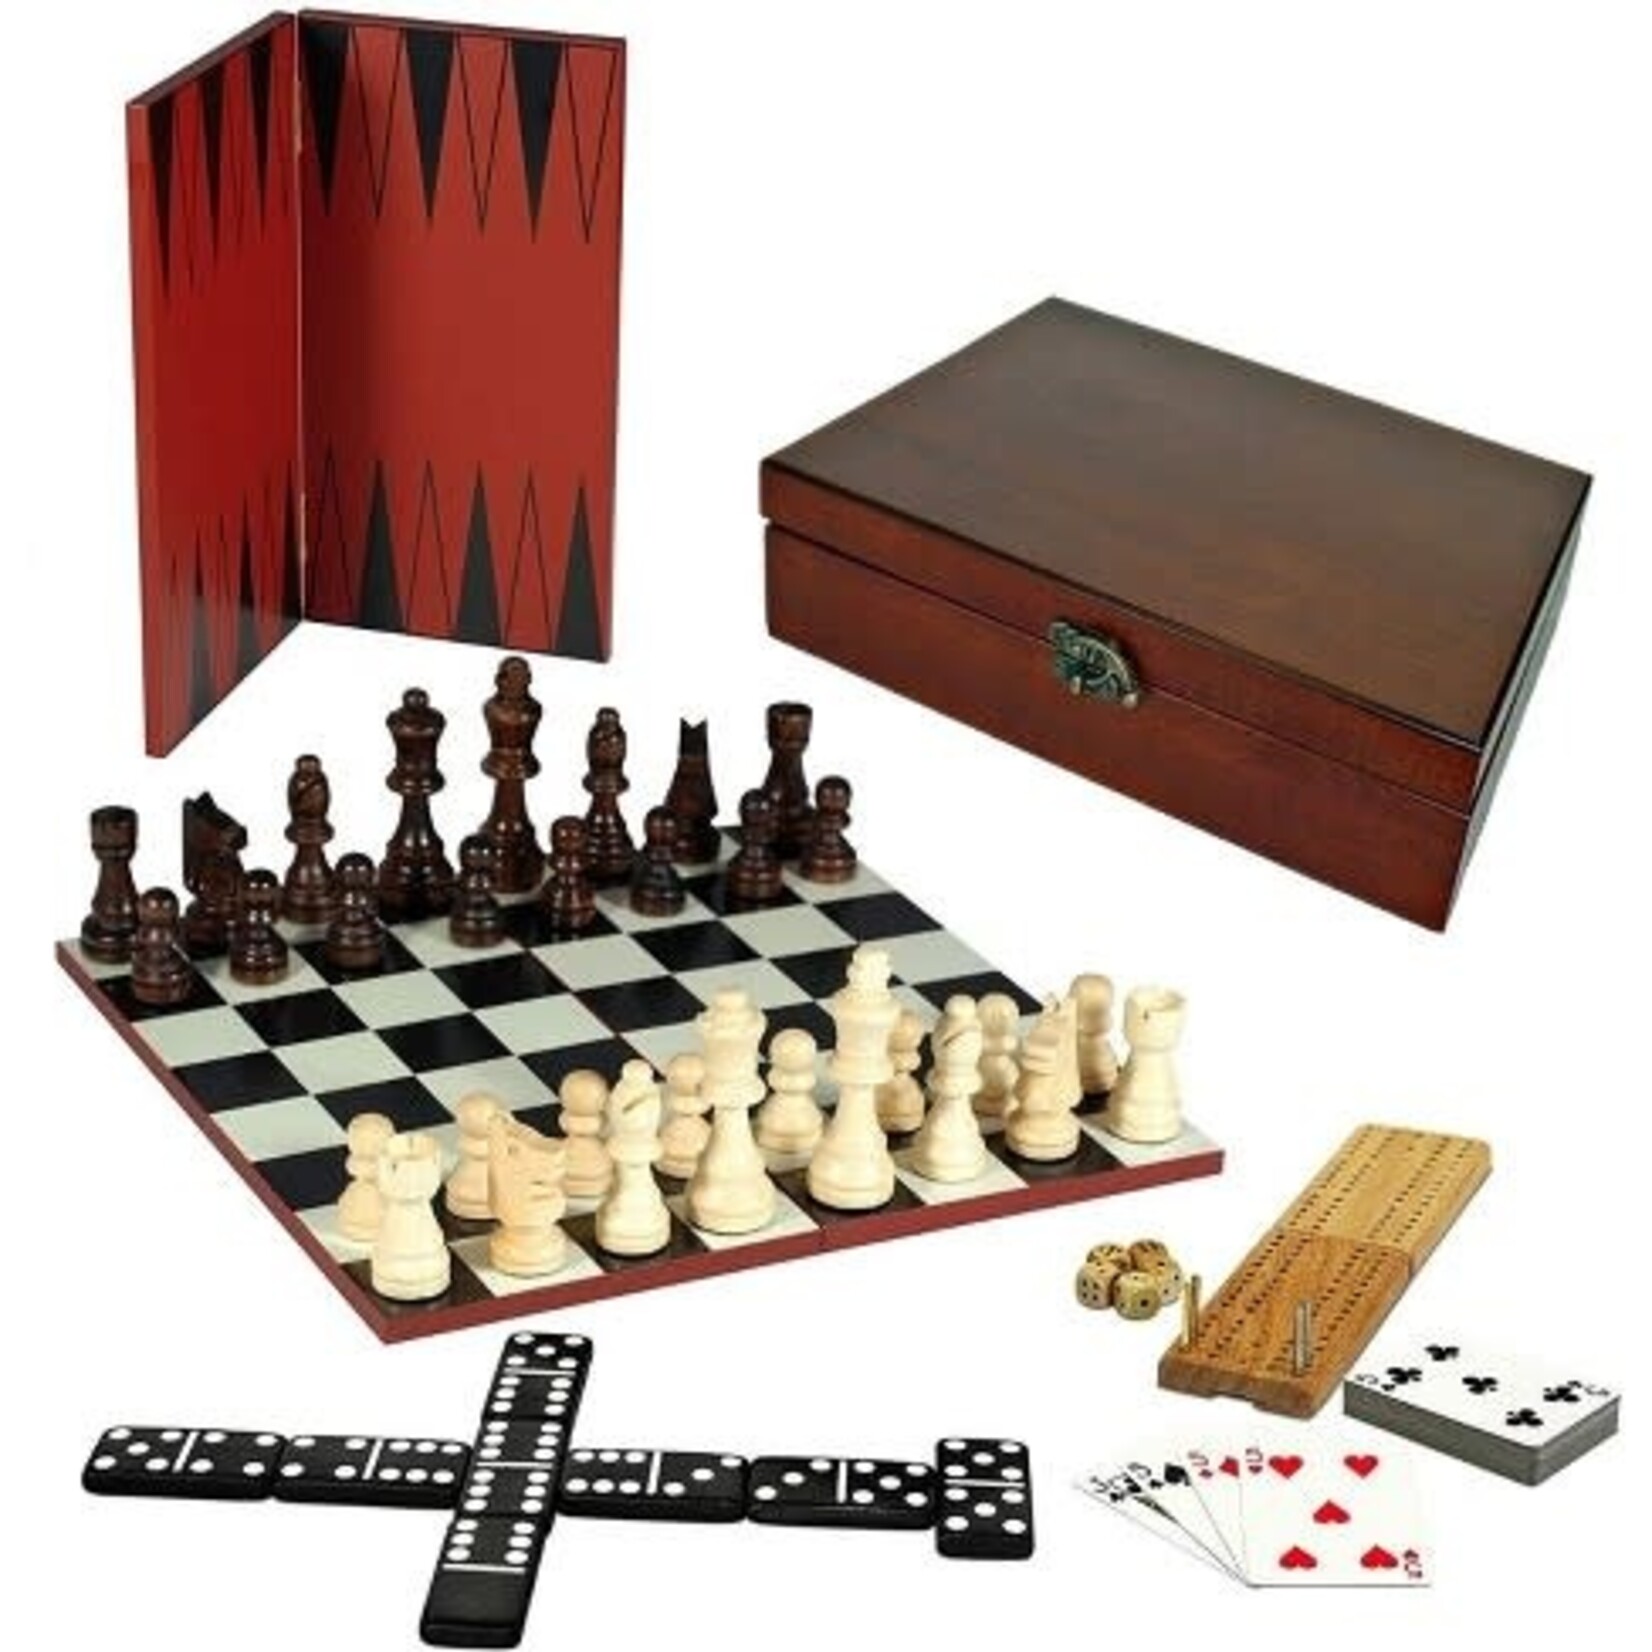 Wood Expressions 7-IN-1 COMBINATION GAME